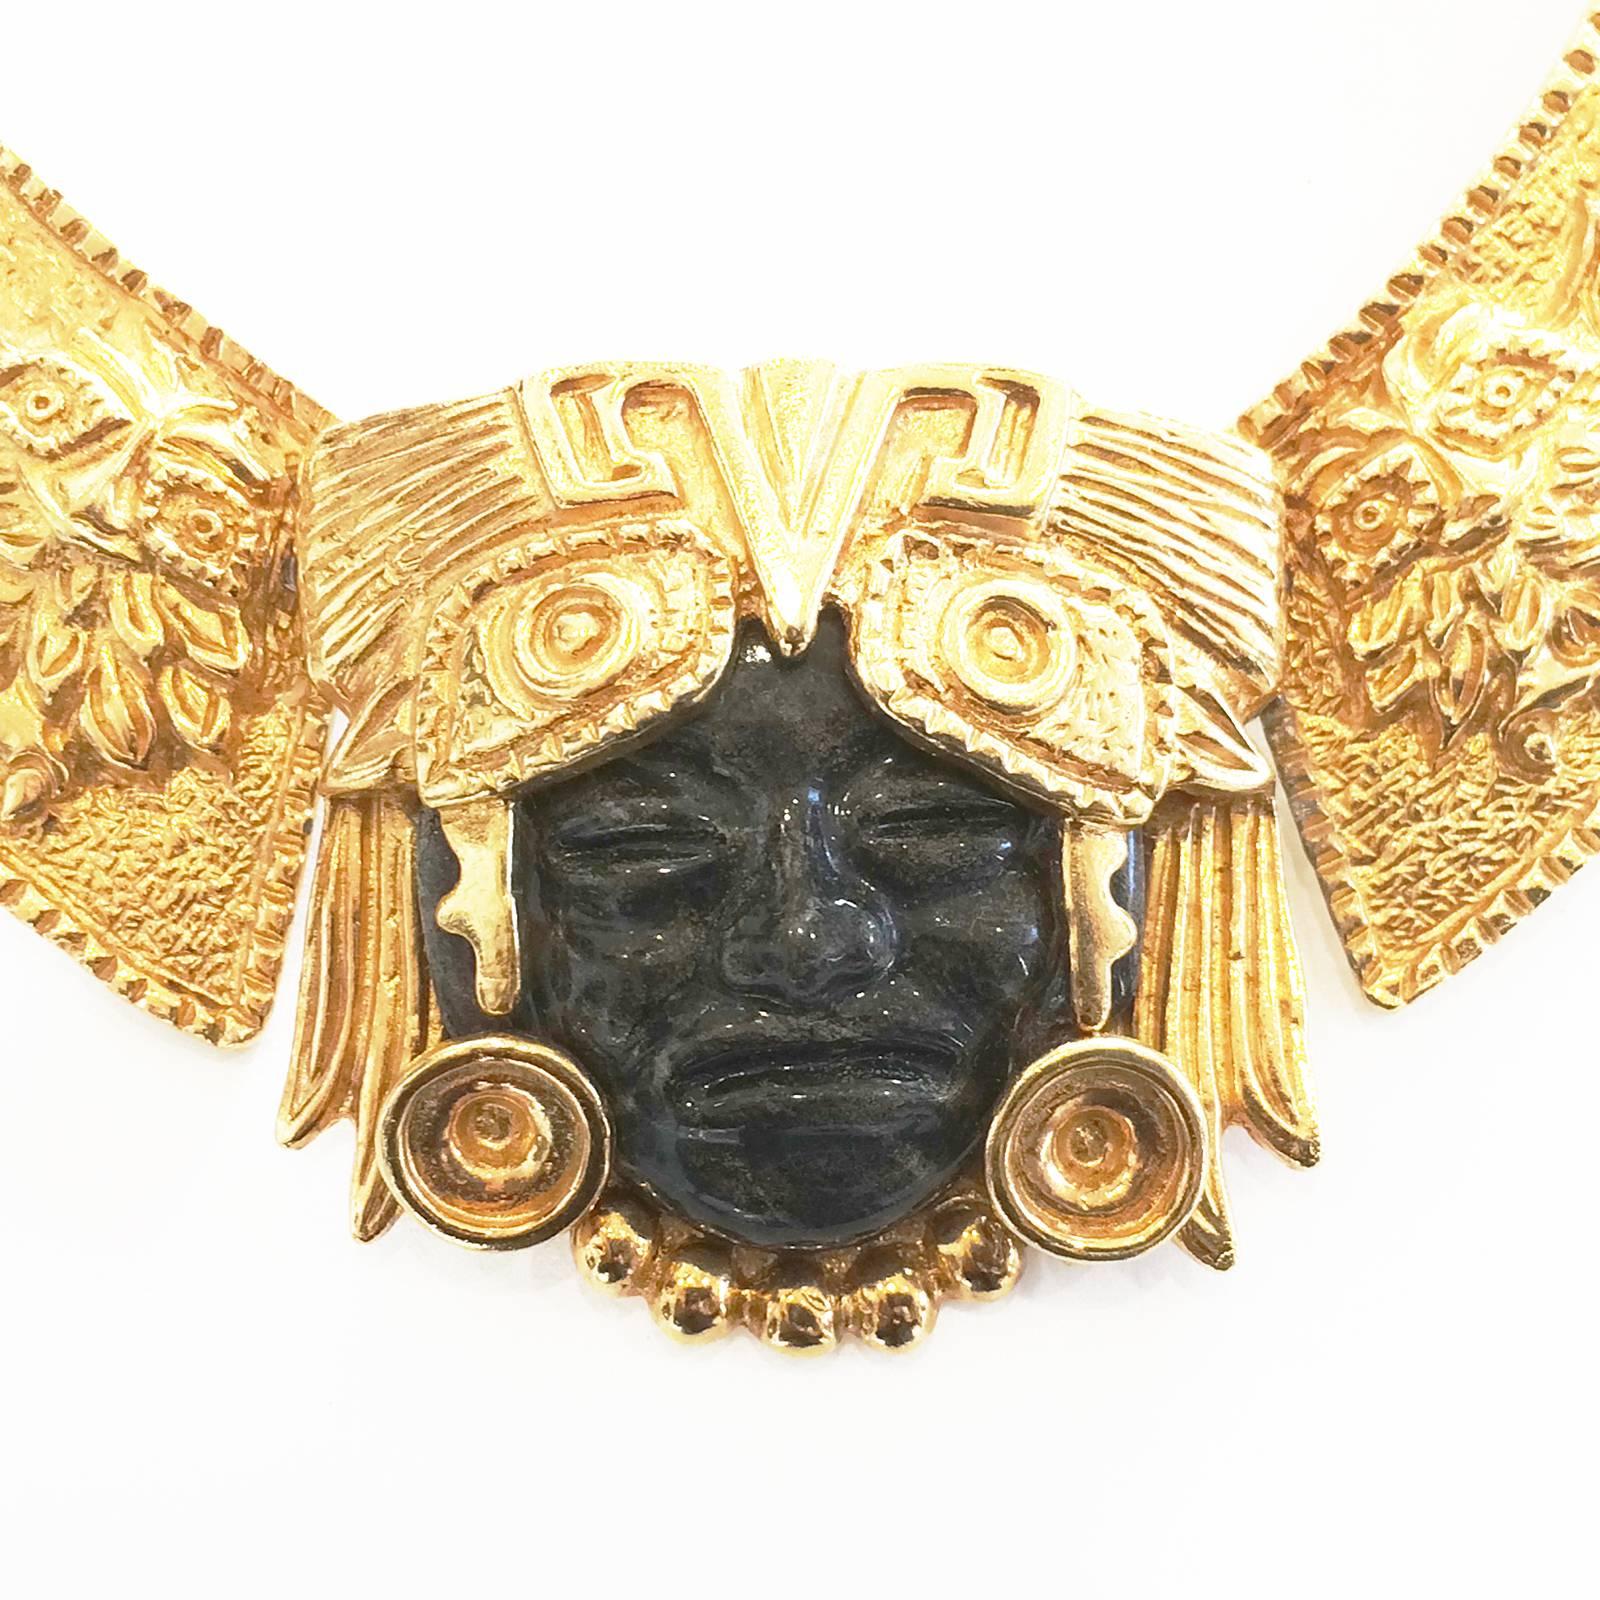 Mid Century Mask Necklace by Marbel Salvador, signed to the rear metal. An amazing high quality piece in an “Aztec” influence design with stylised face in glass and enclosure of Golden Headdress and surrounding, tapering links with “flowers and